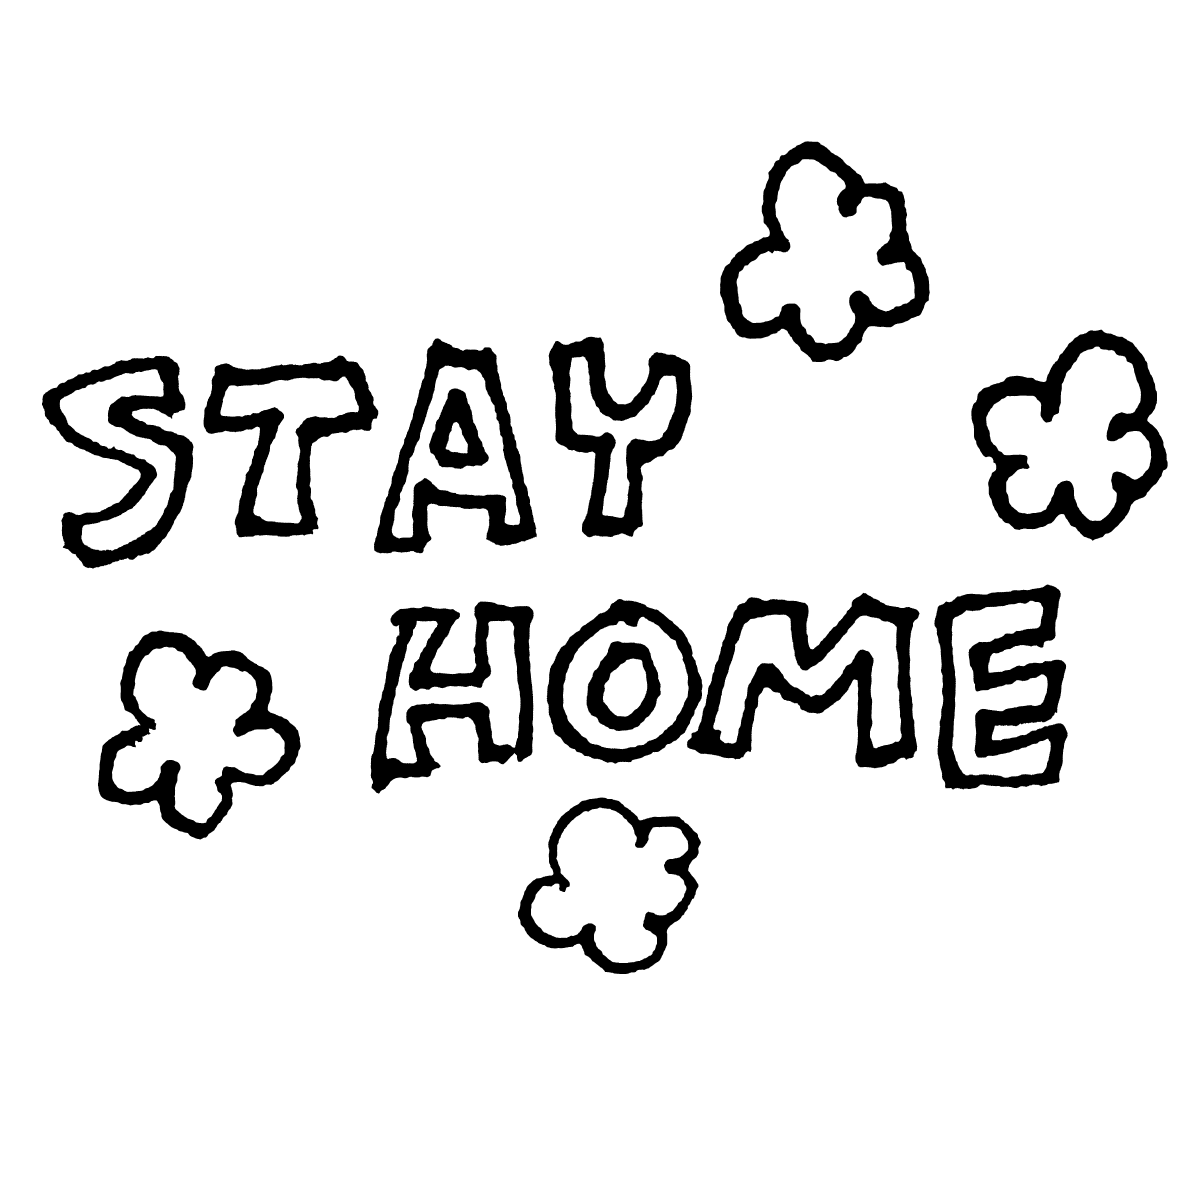 Stay Home 文字 4種 のイラスト Stay Home Character 4 Kinds てがきですのb かわいい ゆるい無料イラスト